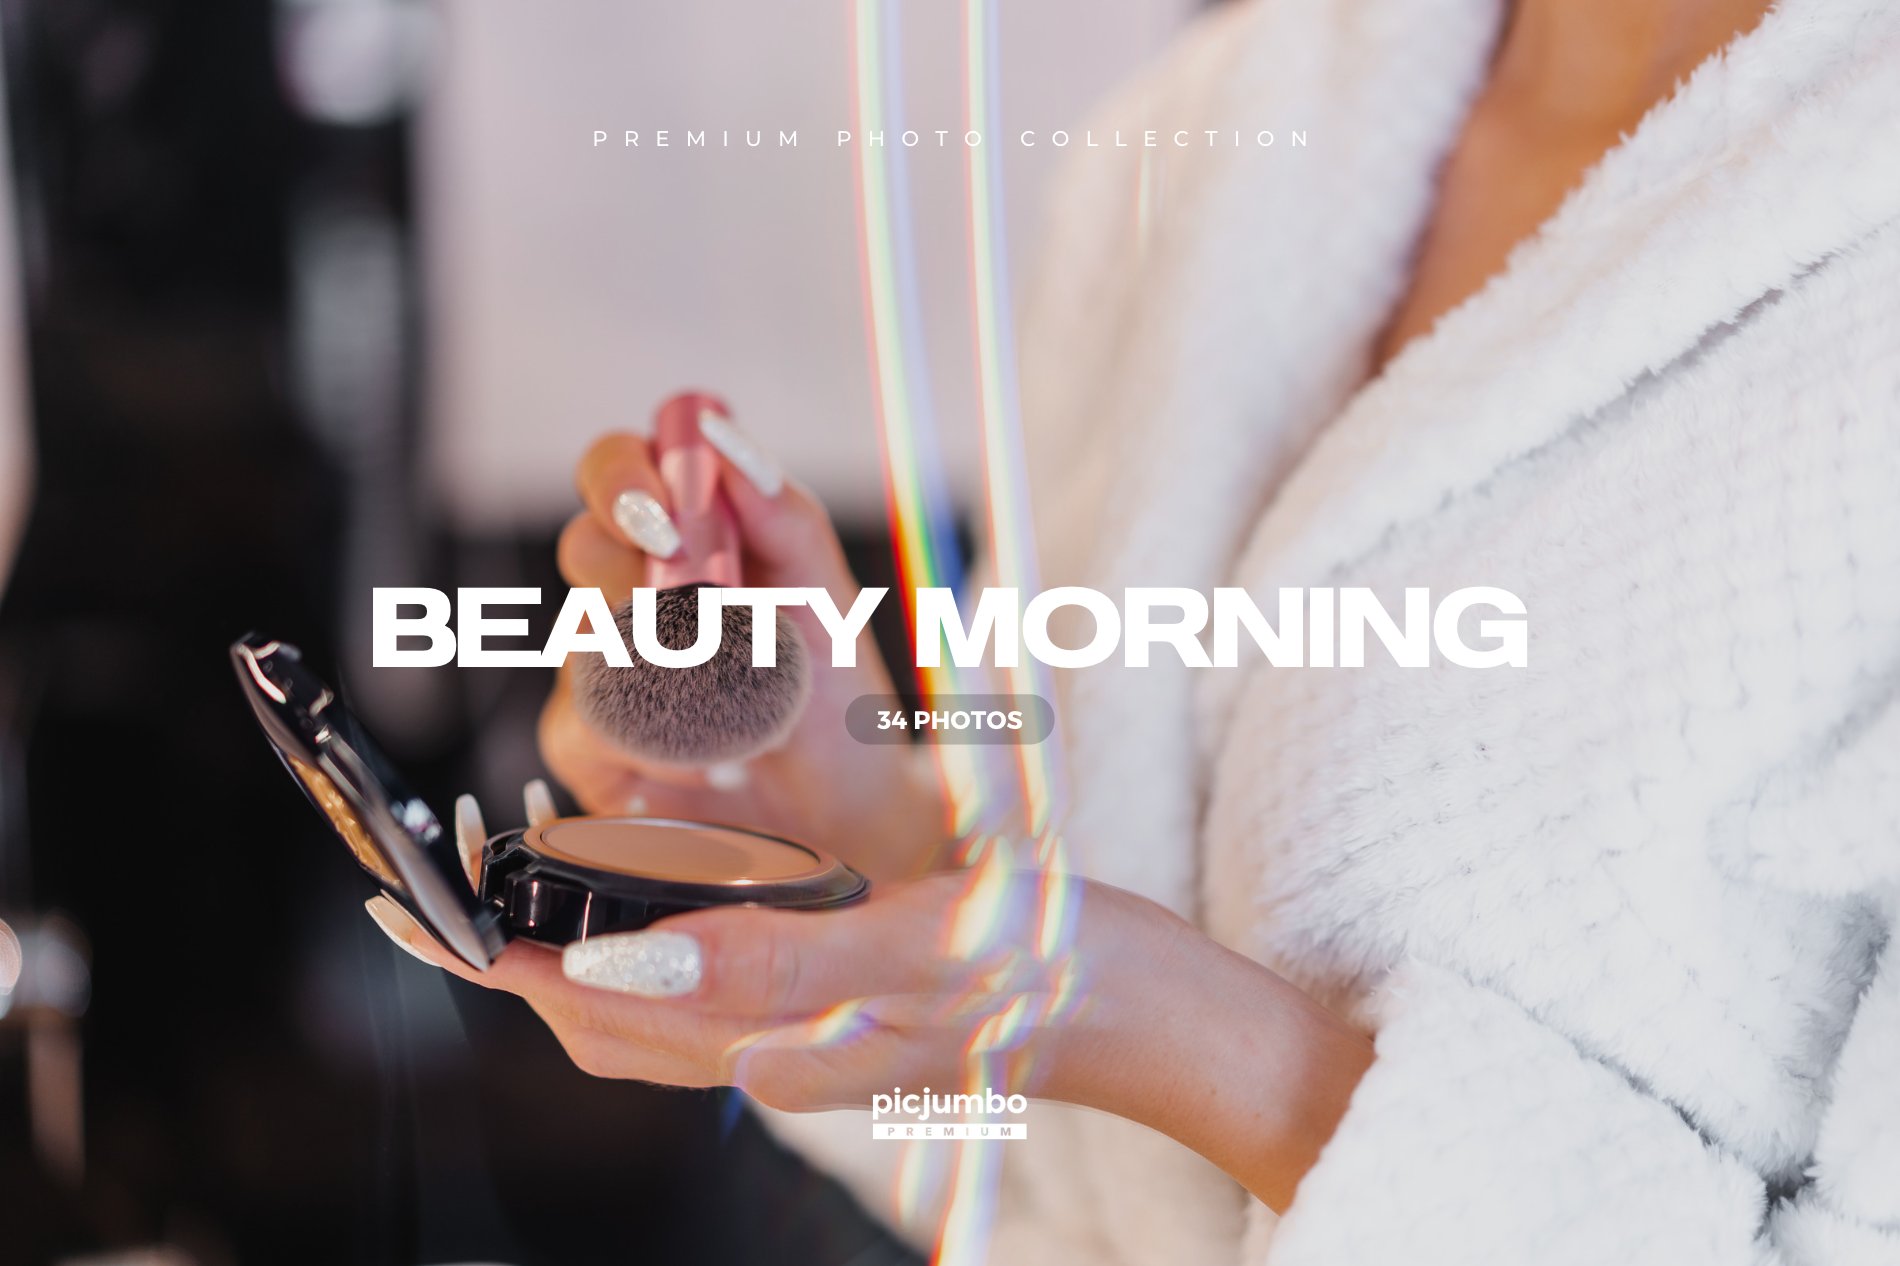 Beauty Morning Stock Photo Collection